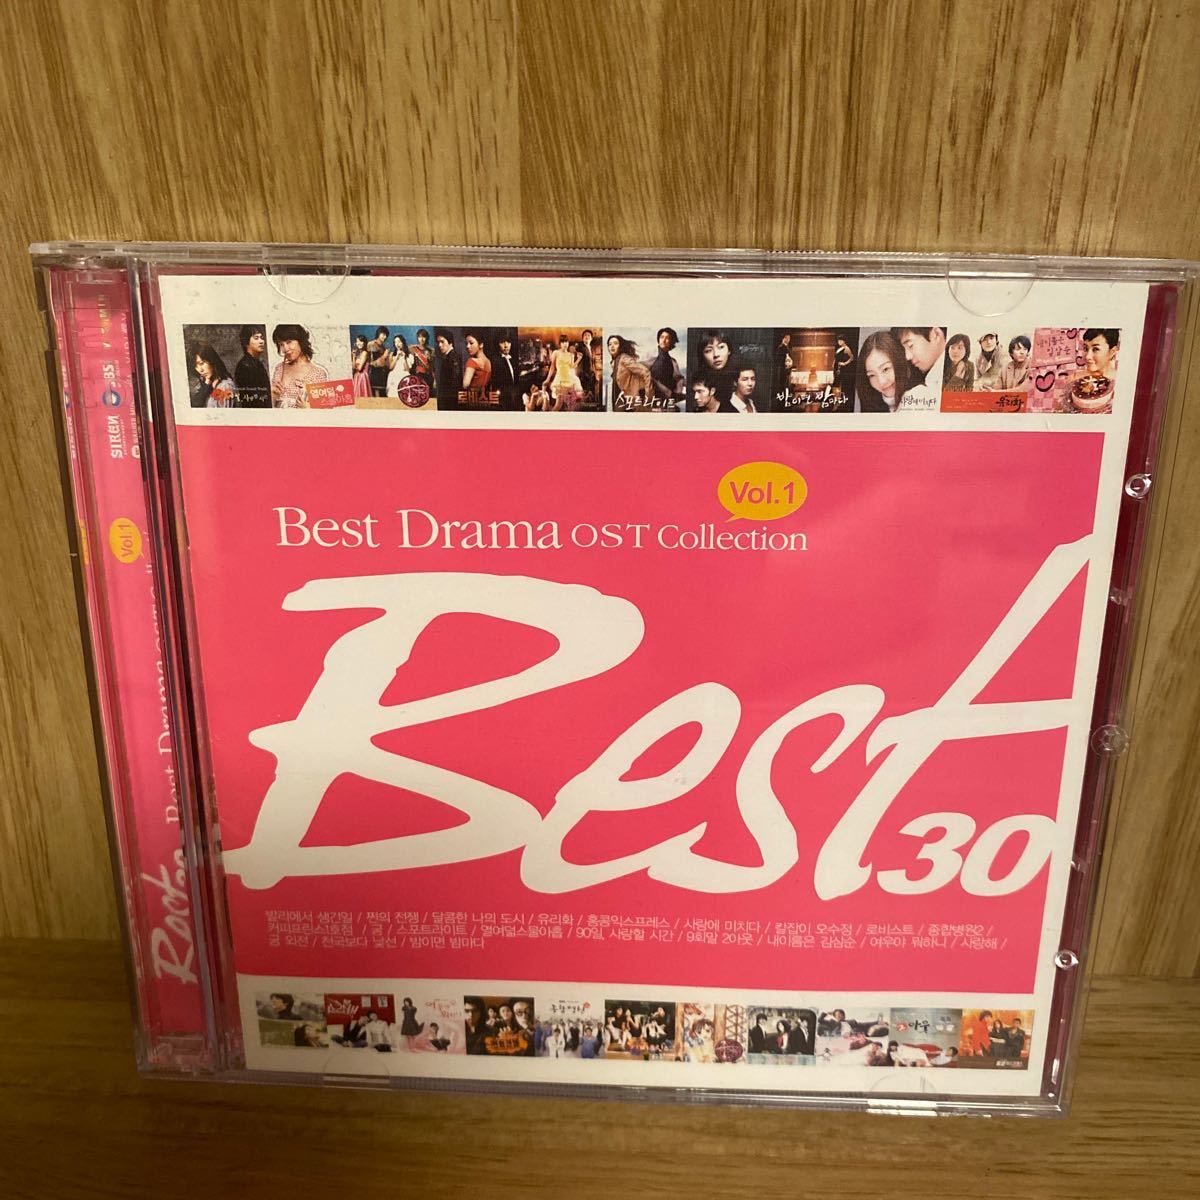 BEST DRAMA OST COLLECTION VOL. 1 [2CD]